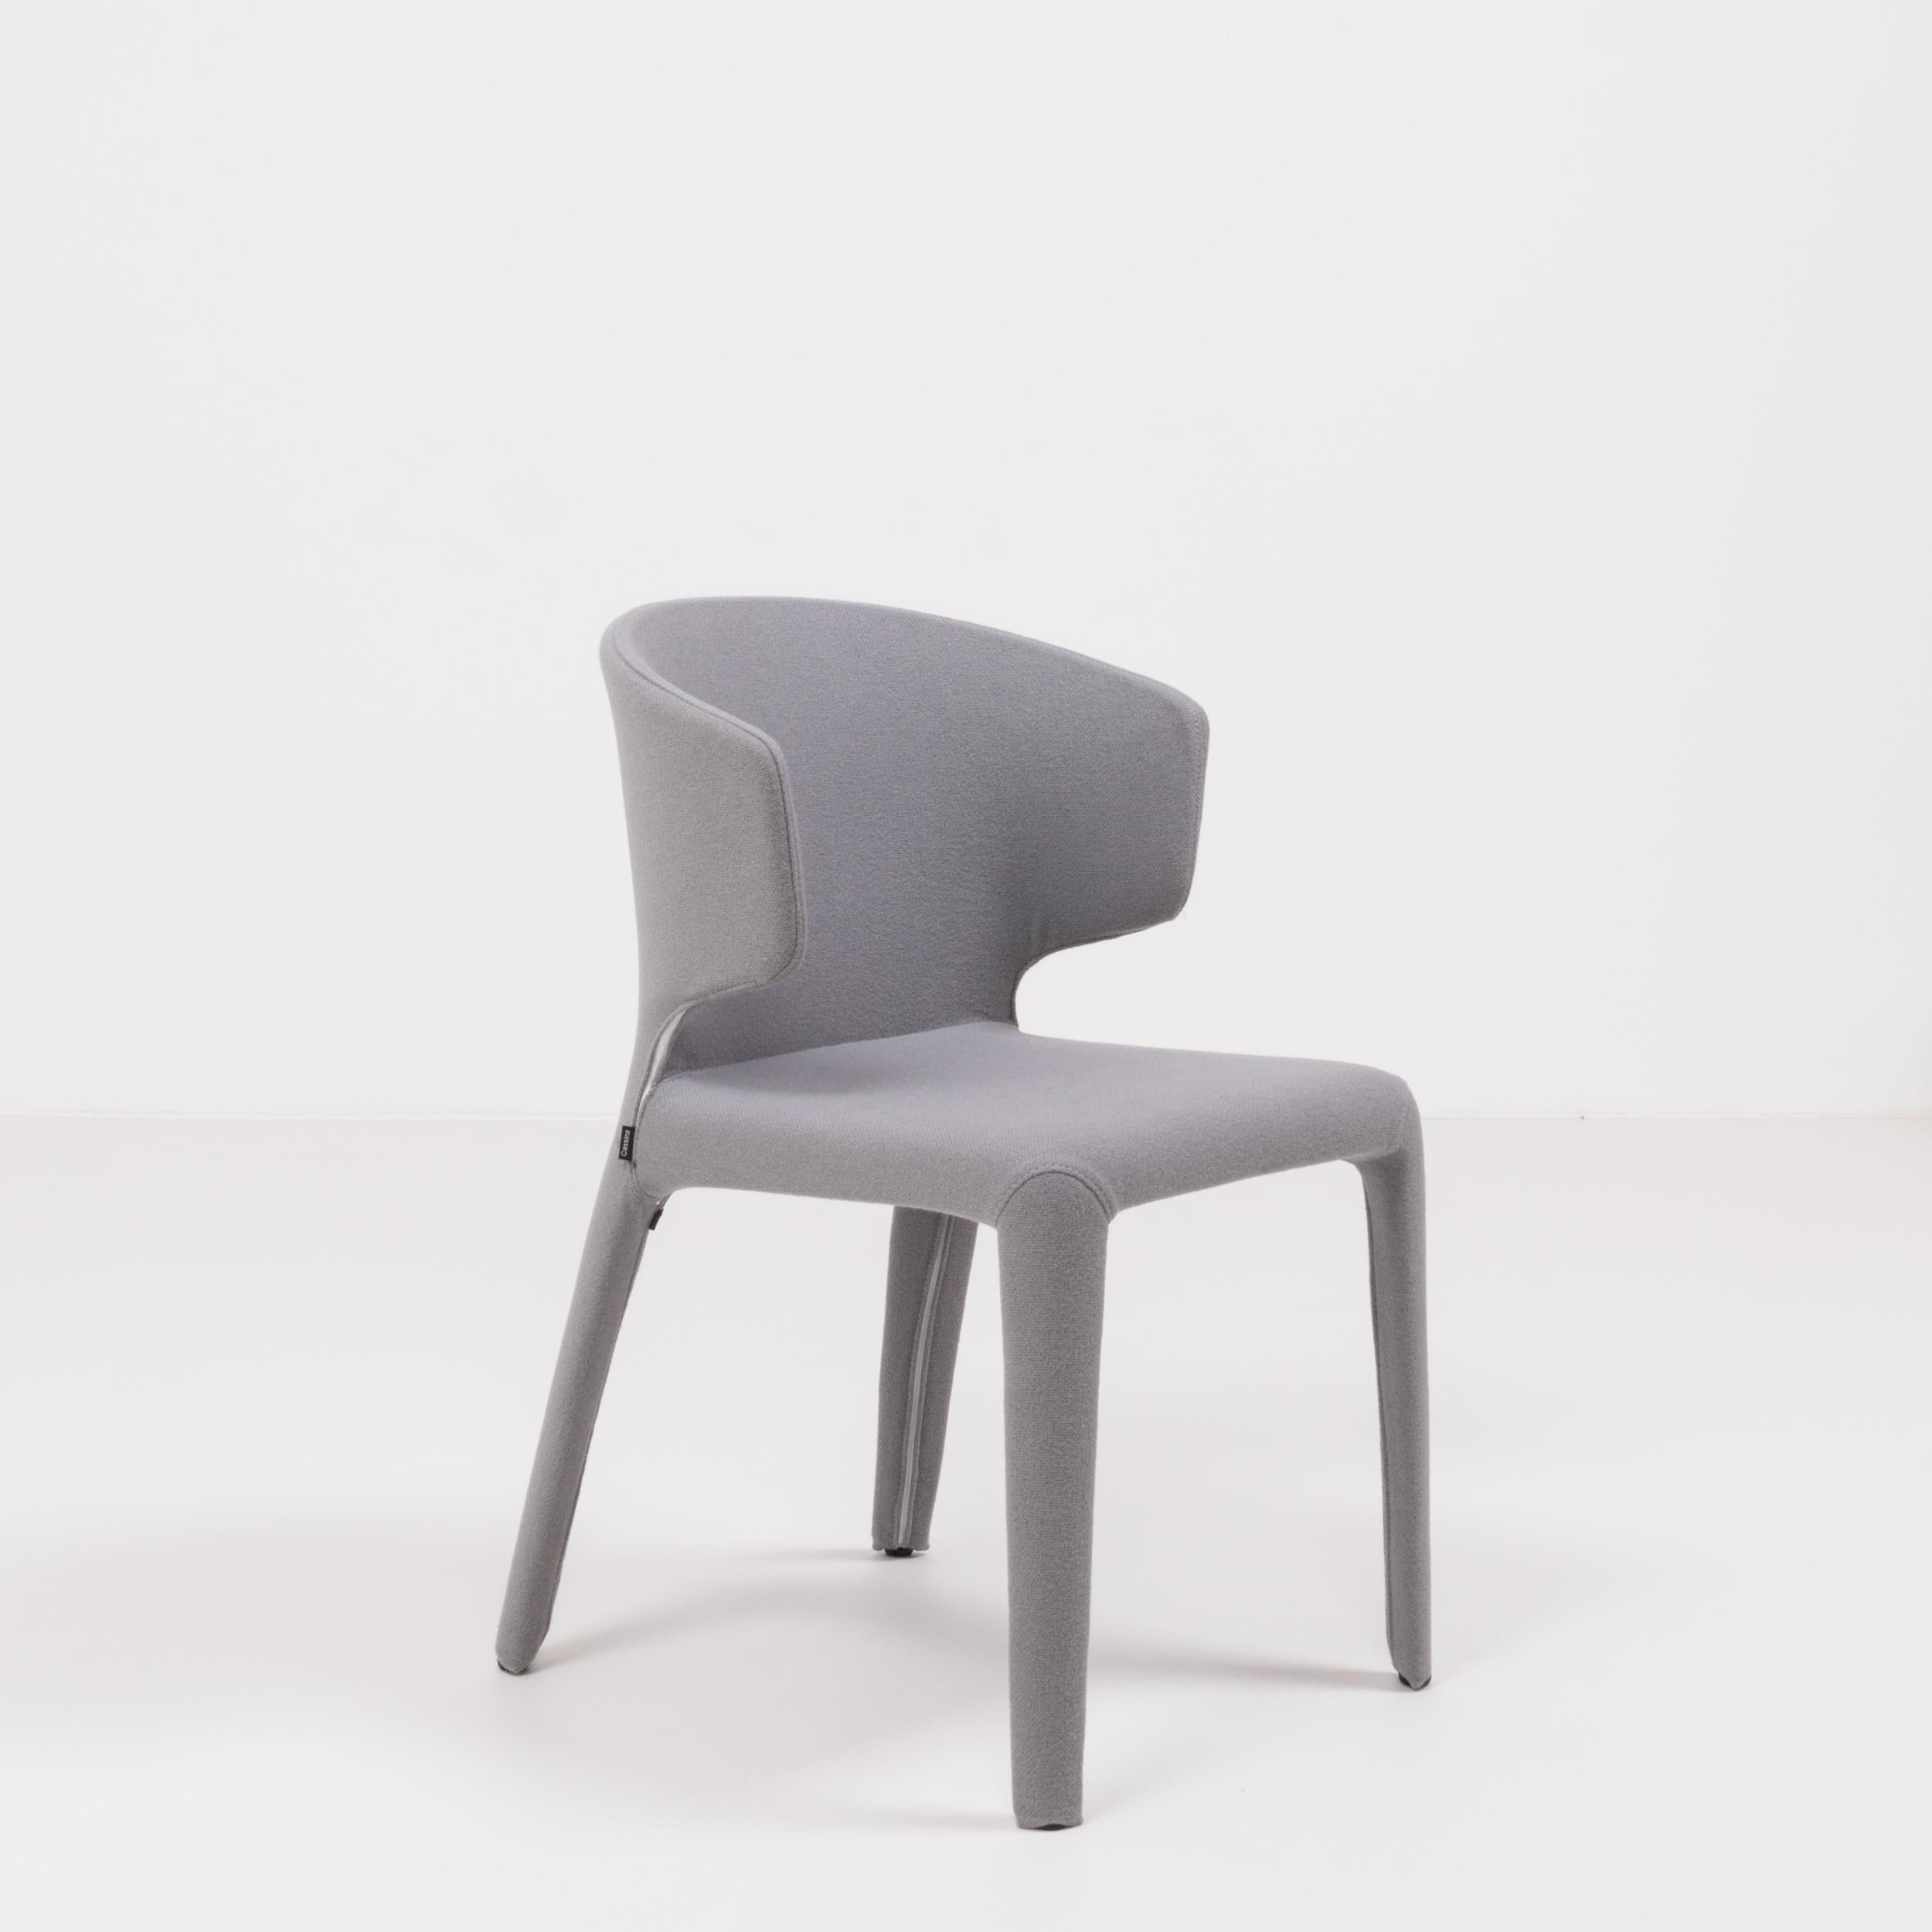 Designed by Hannes Wettstein for Cassina in 2003, these 367 hola dining chairs have a sleek, contemporary silhouette.
 
The set of eight chairs are in excellent, nearly new condition and are fully upholstered in grey wool with zips that allow the